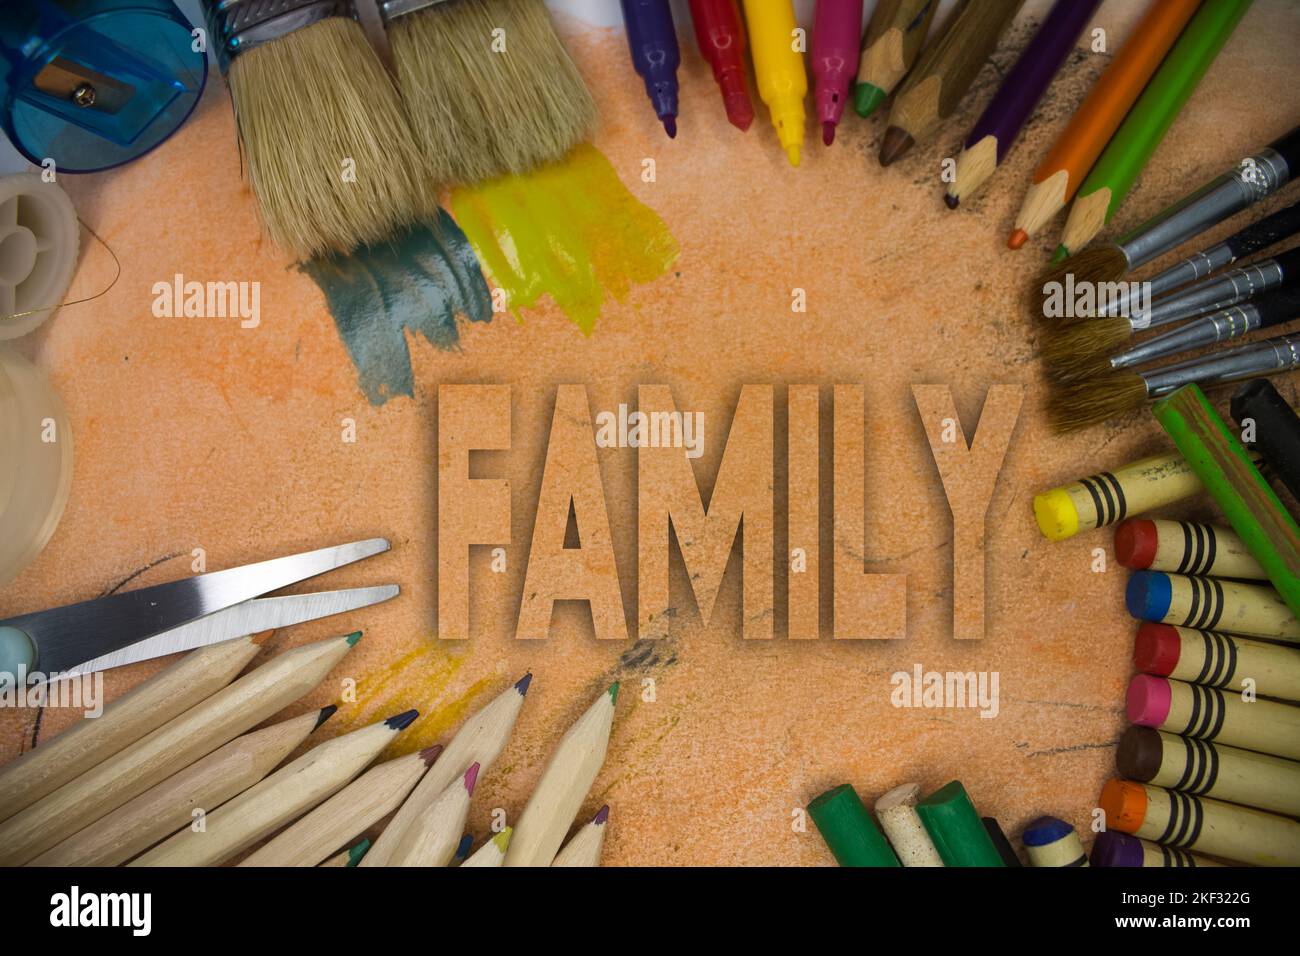 Overhead shot of school supplies with Family text. Brushes, pencils, artistic tools. Art And Craft Work Tools. Stock Photo